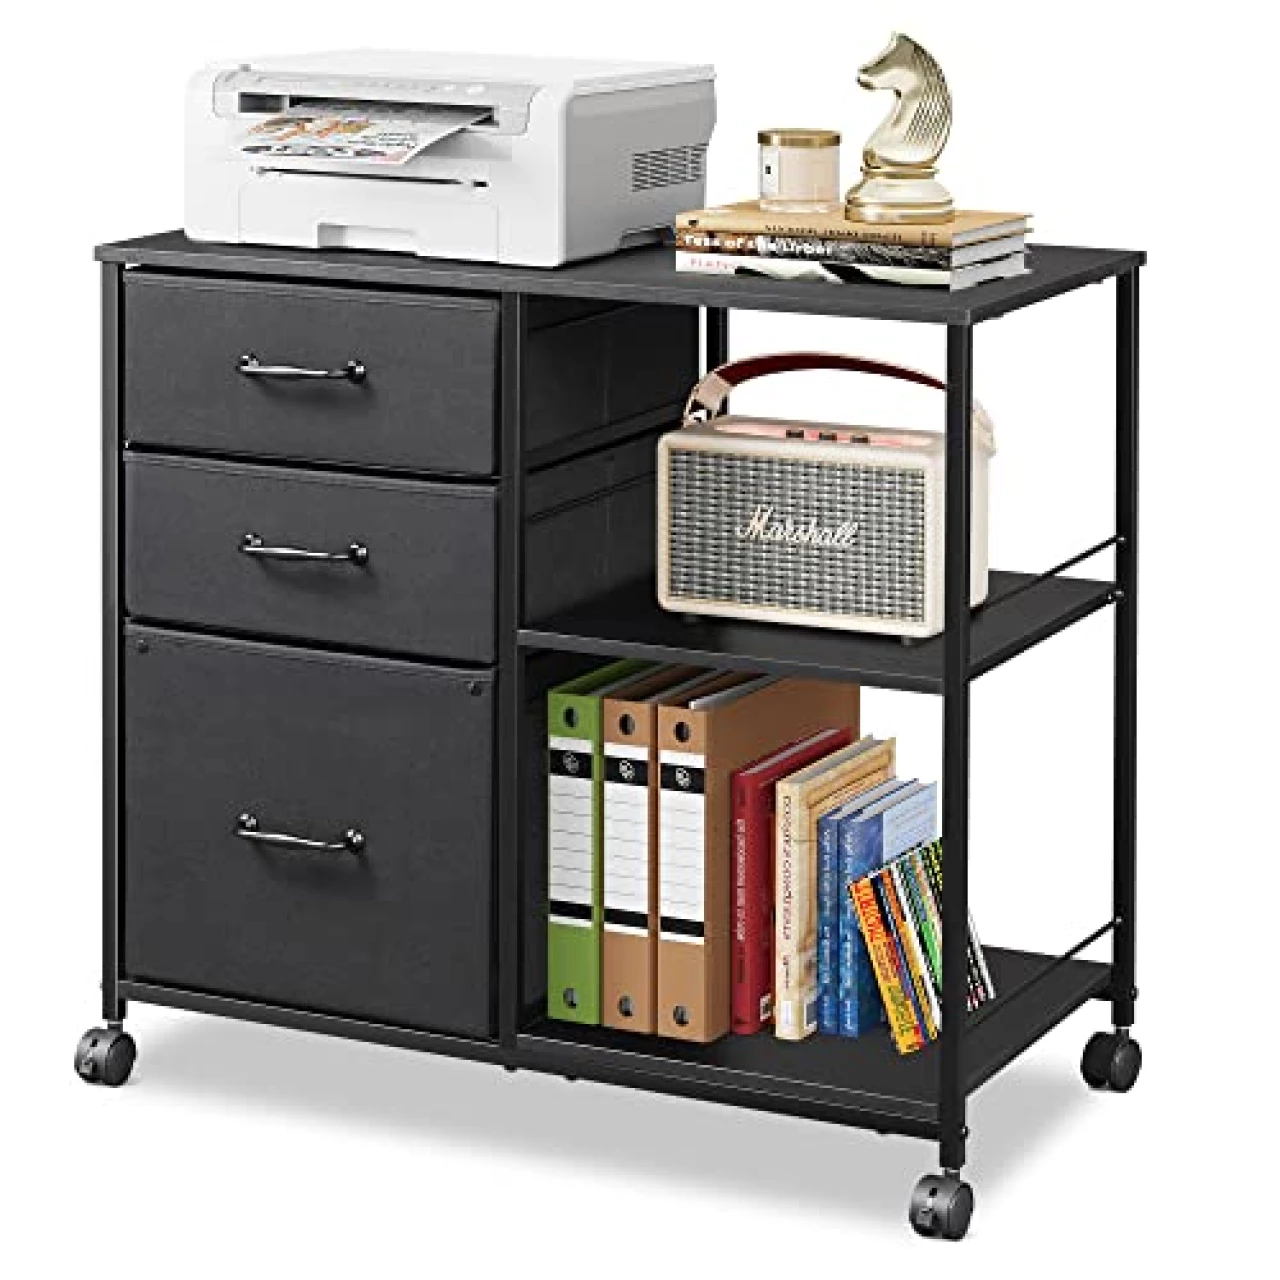 DEVAISE 3 Drawer Mobile File Cabinet, Rolling Printer Stand with Open Storage Shelf, Fabric Lateral Filing Cabinet fits A4 or Letter Size for Home Office, Black